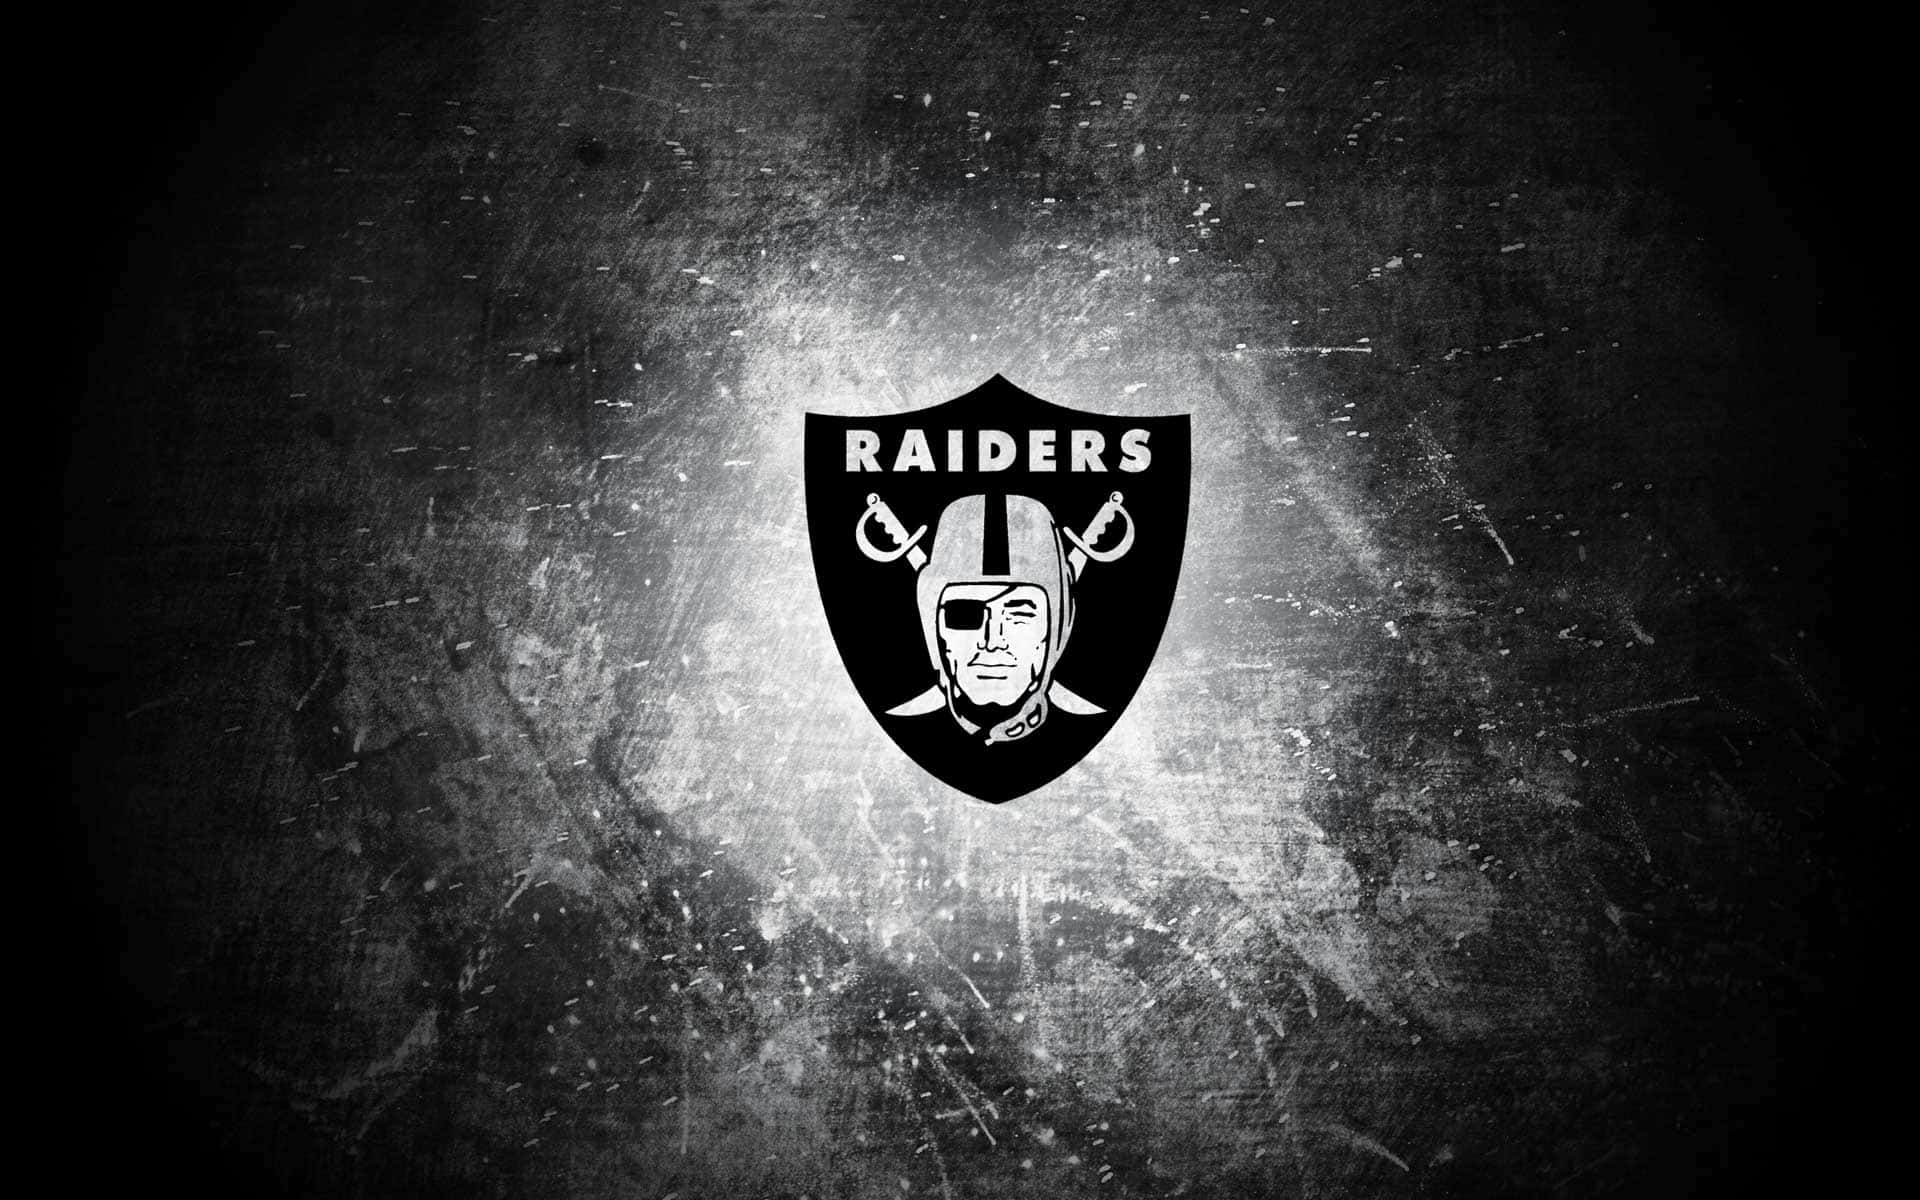 Free Raiders Wallpaper Downloads, [100+] Raiders Wallpapers for FREE |  